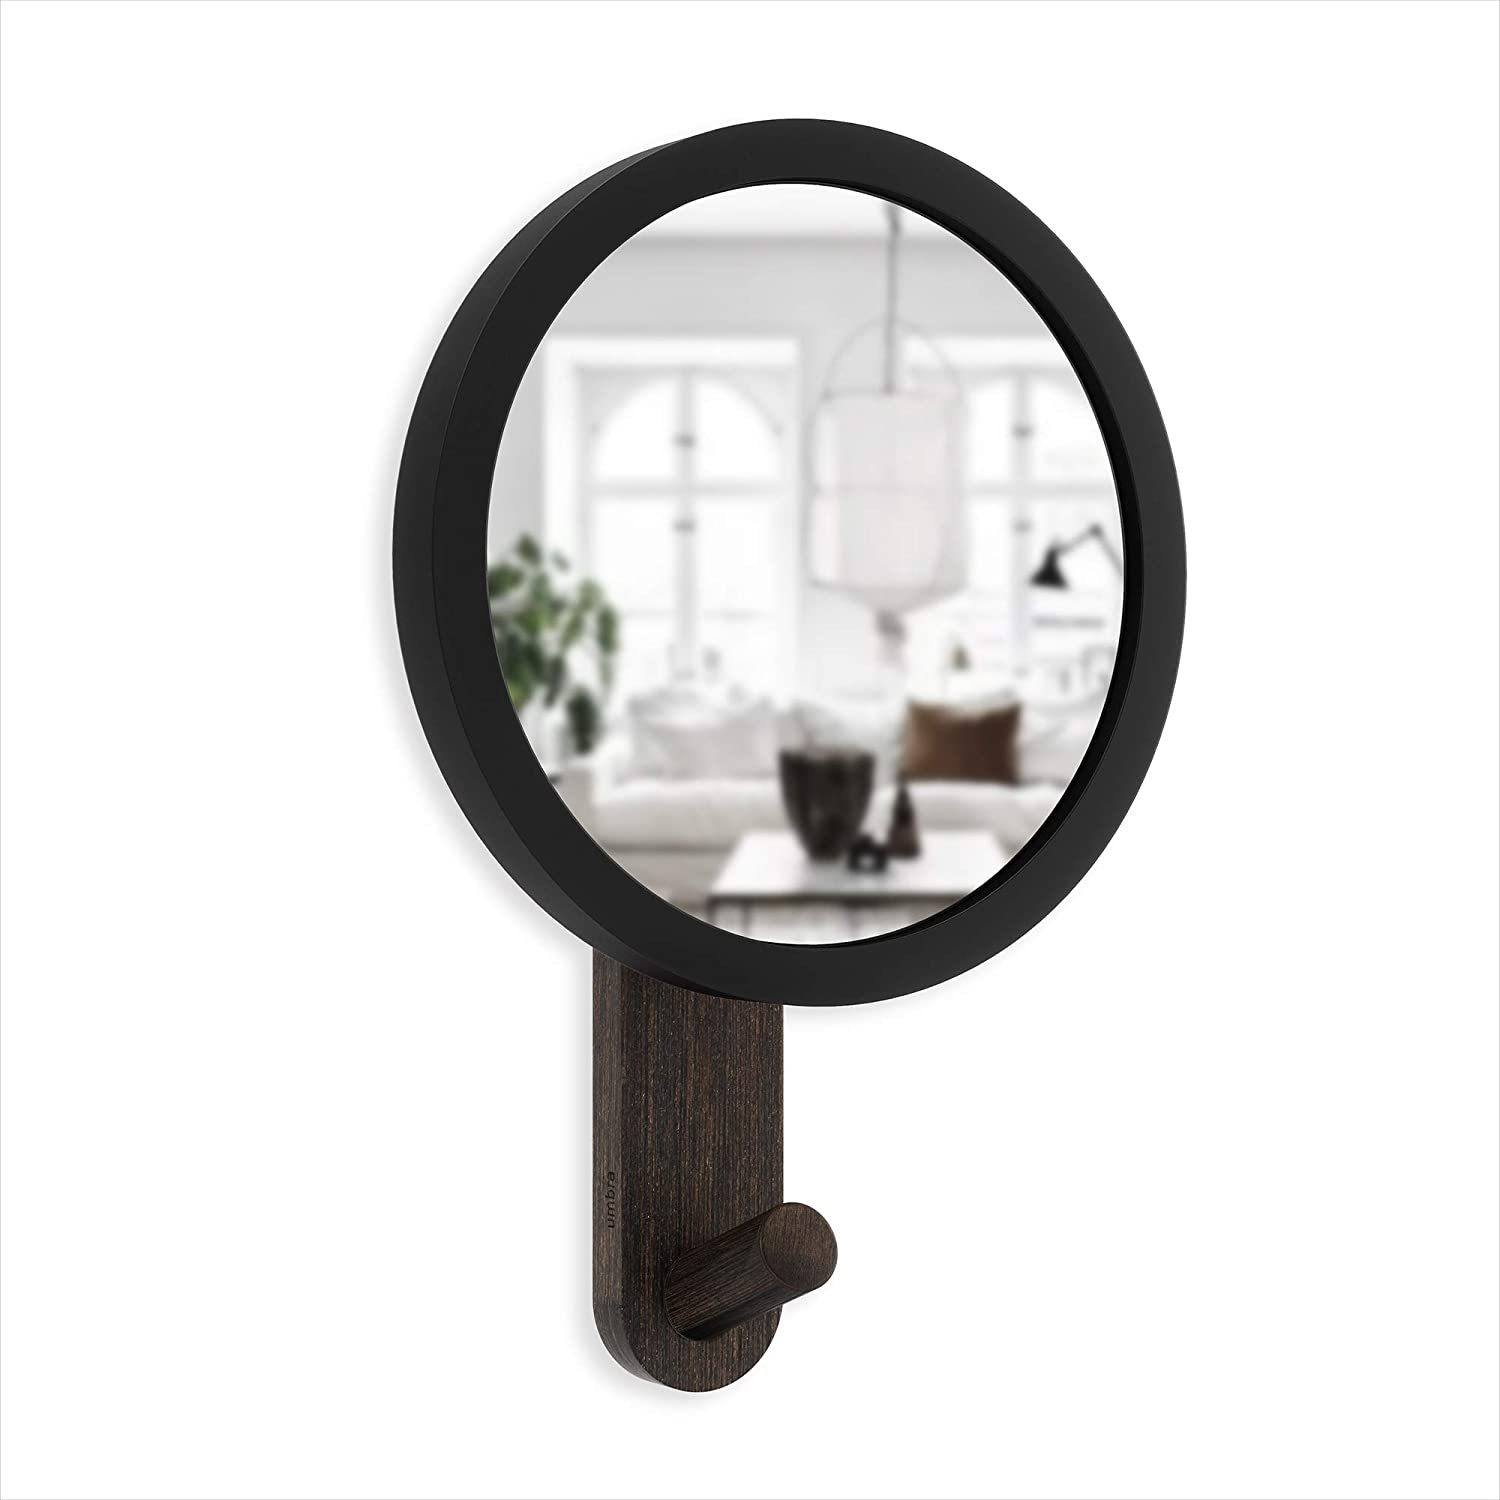 Umbra Hub Wall Mirror With Coat Hook For Hallway, Bedroom And More - Black/